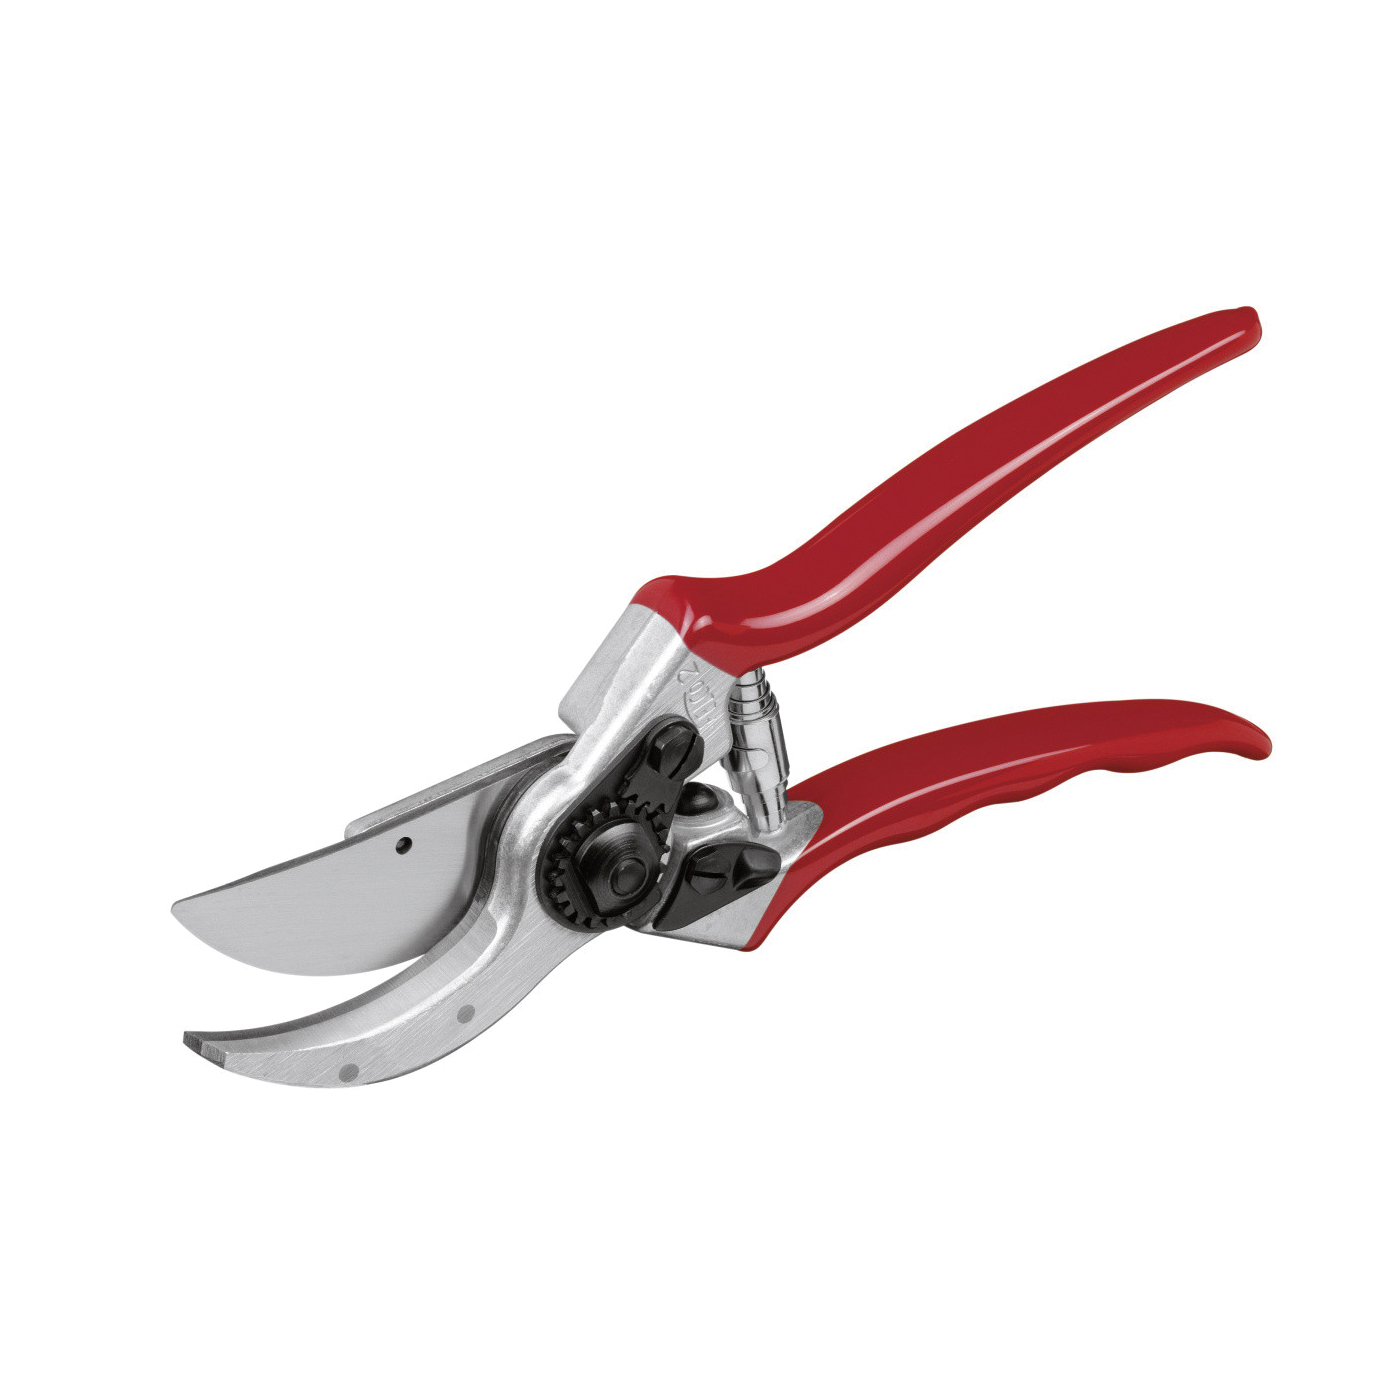 Felco F-2 Pruning Shear, 0.98 in Cutting Capacity, Steel Blade, Bypass Blade, Aluminum Handle - 3